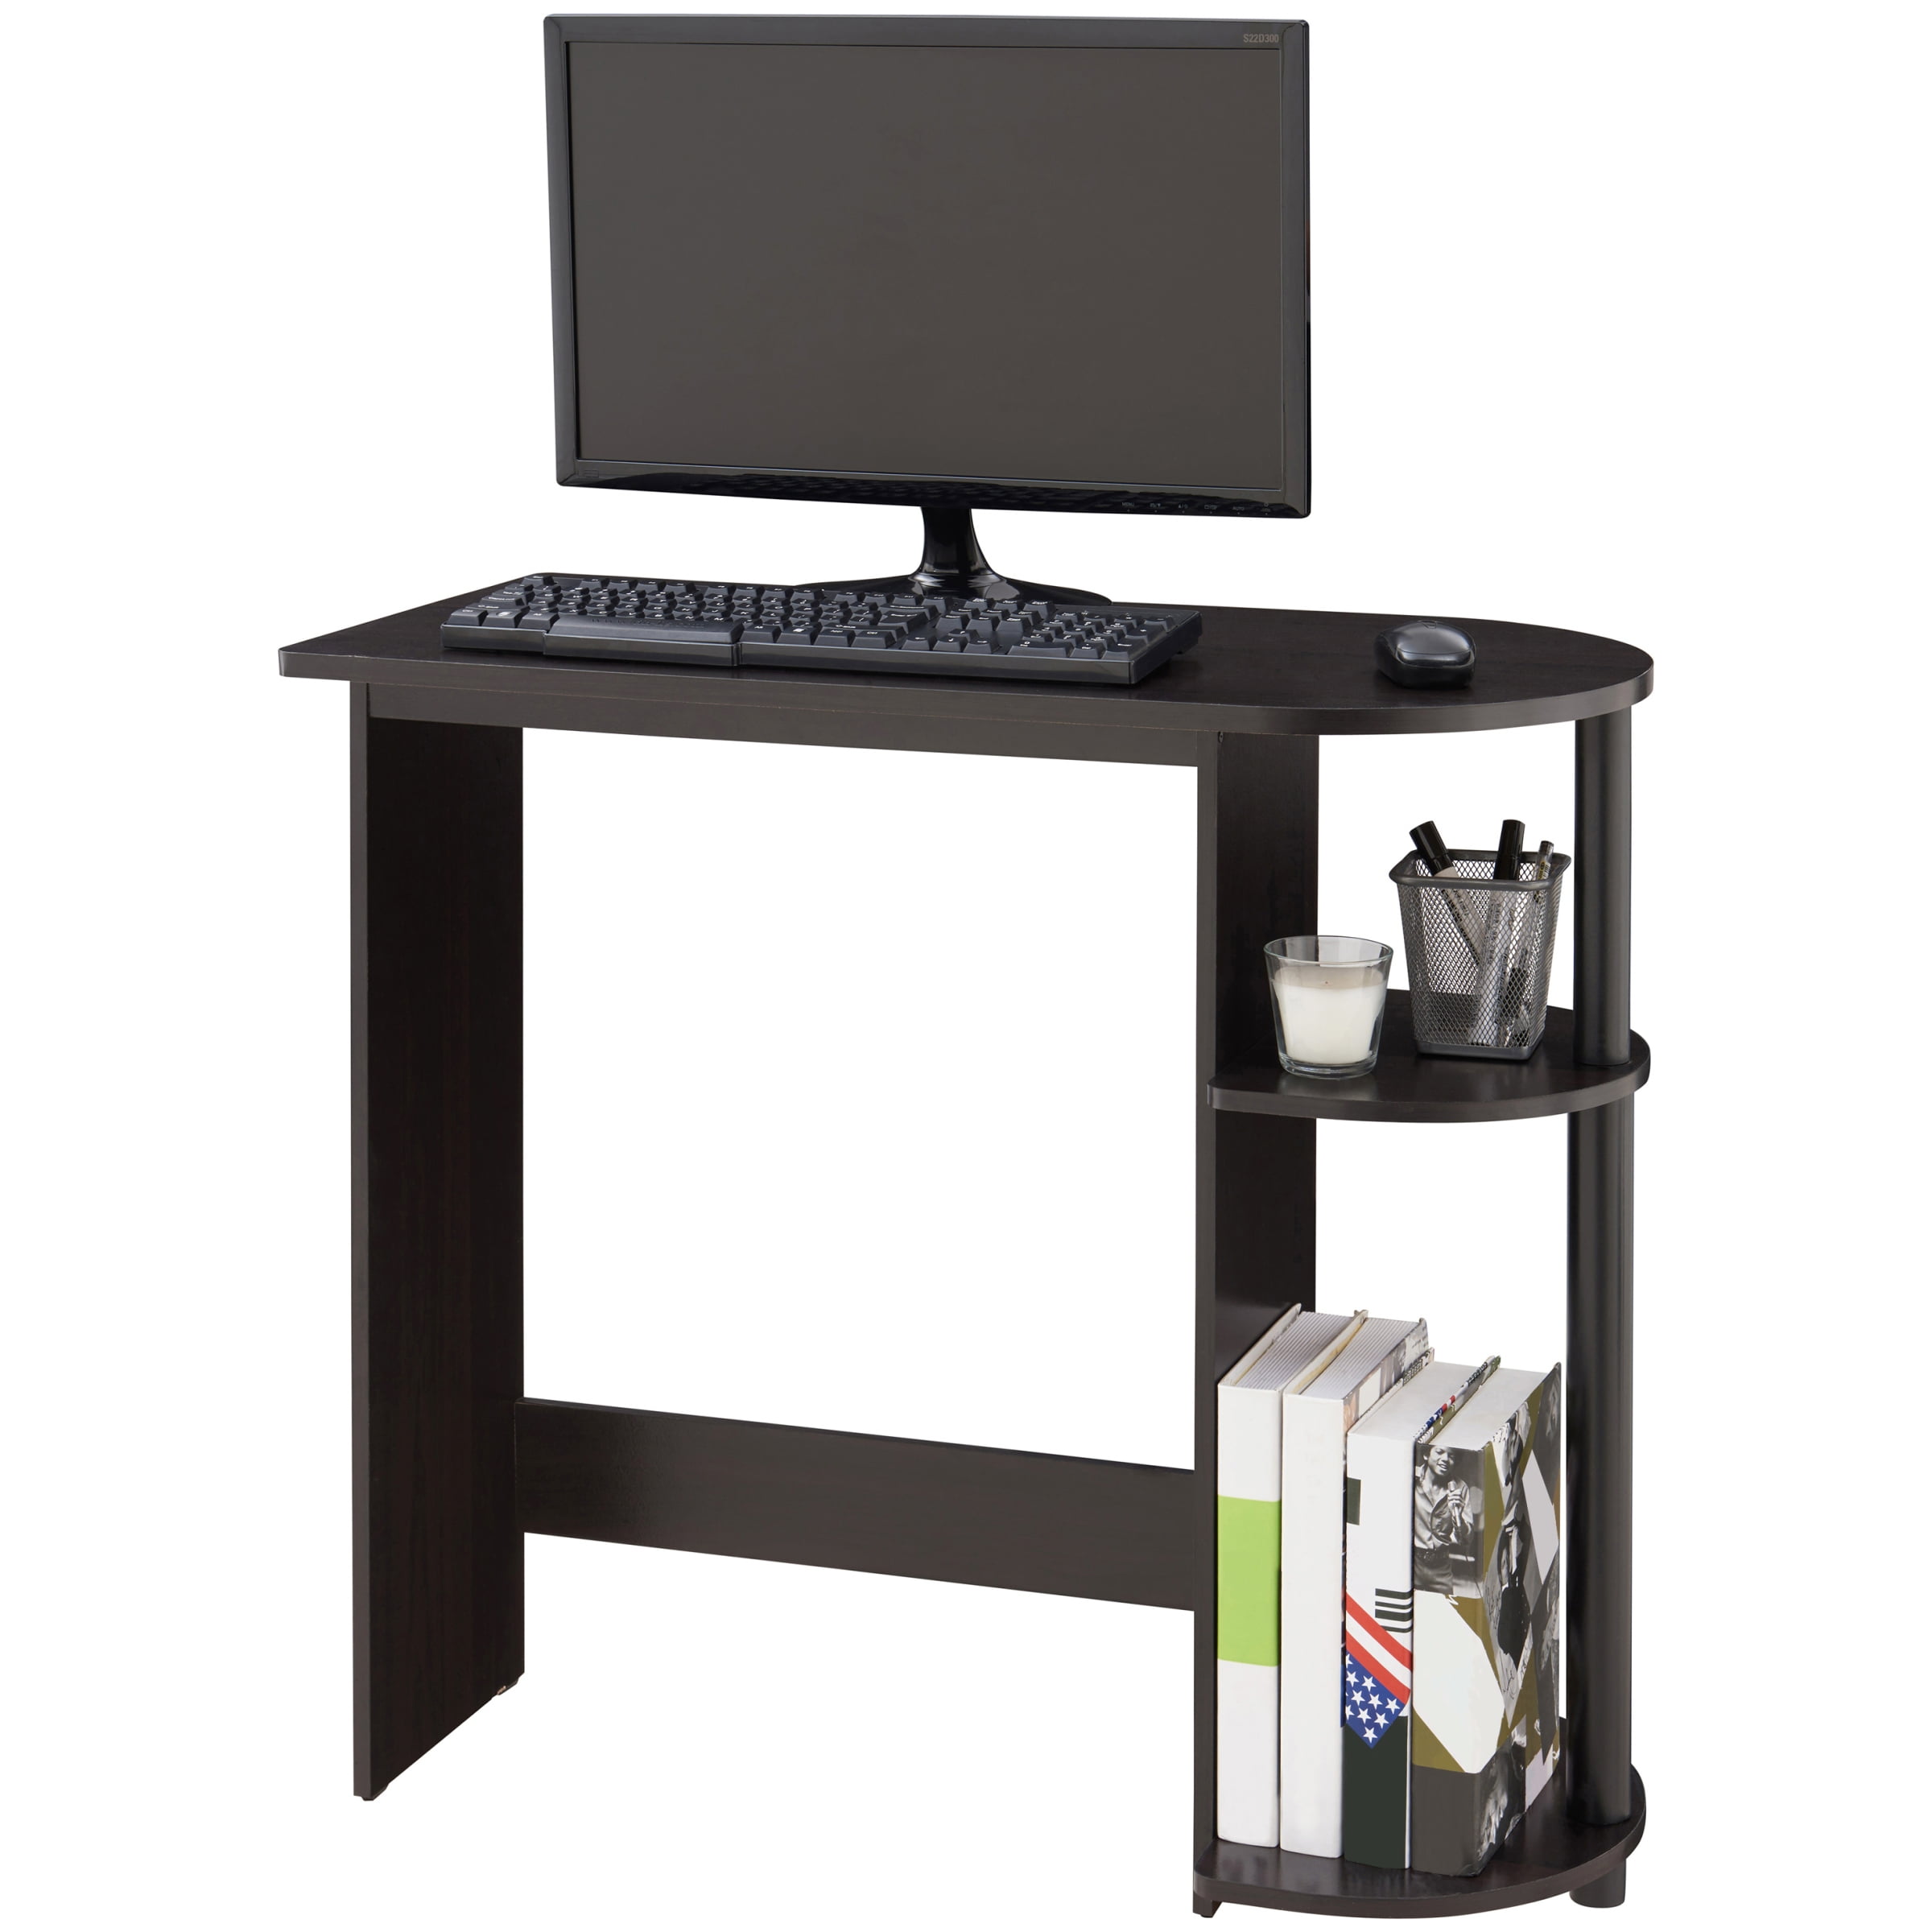 Details about   Mainstays Table sumpter laptop Desk black home 2 drawers furniture ship free 